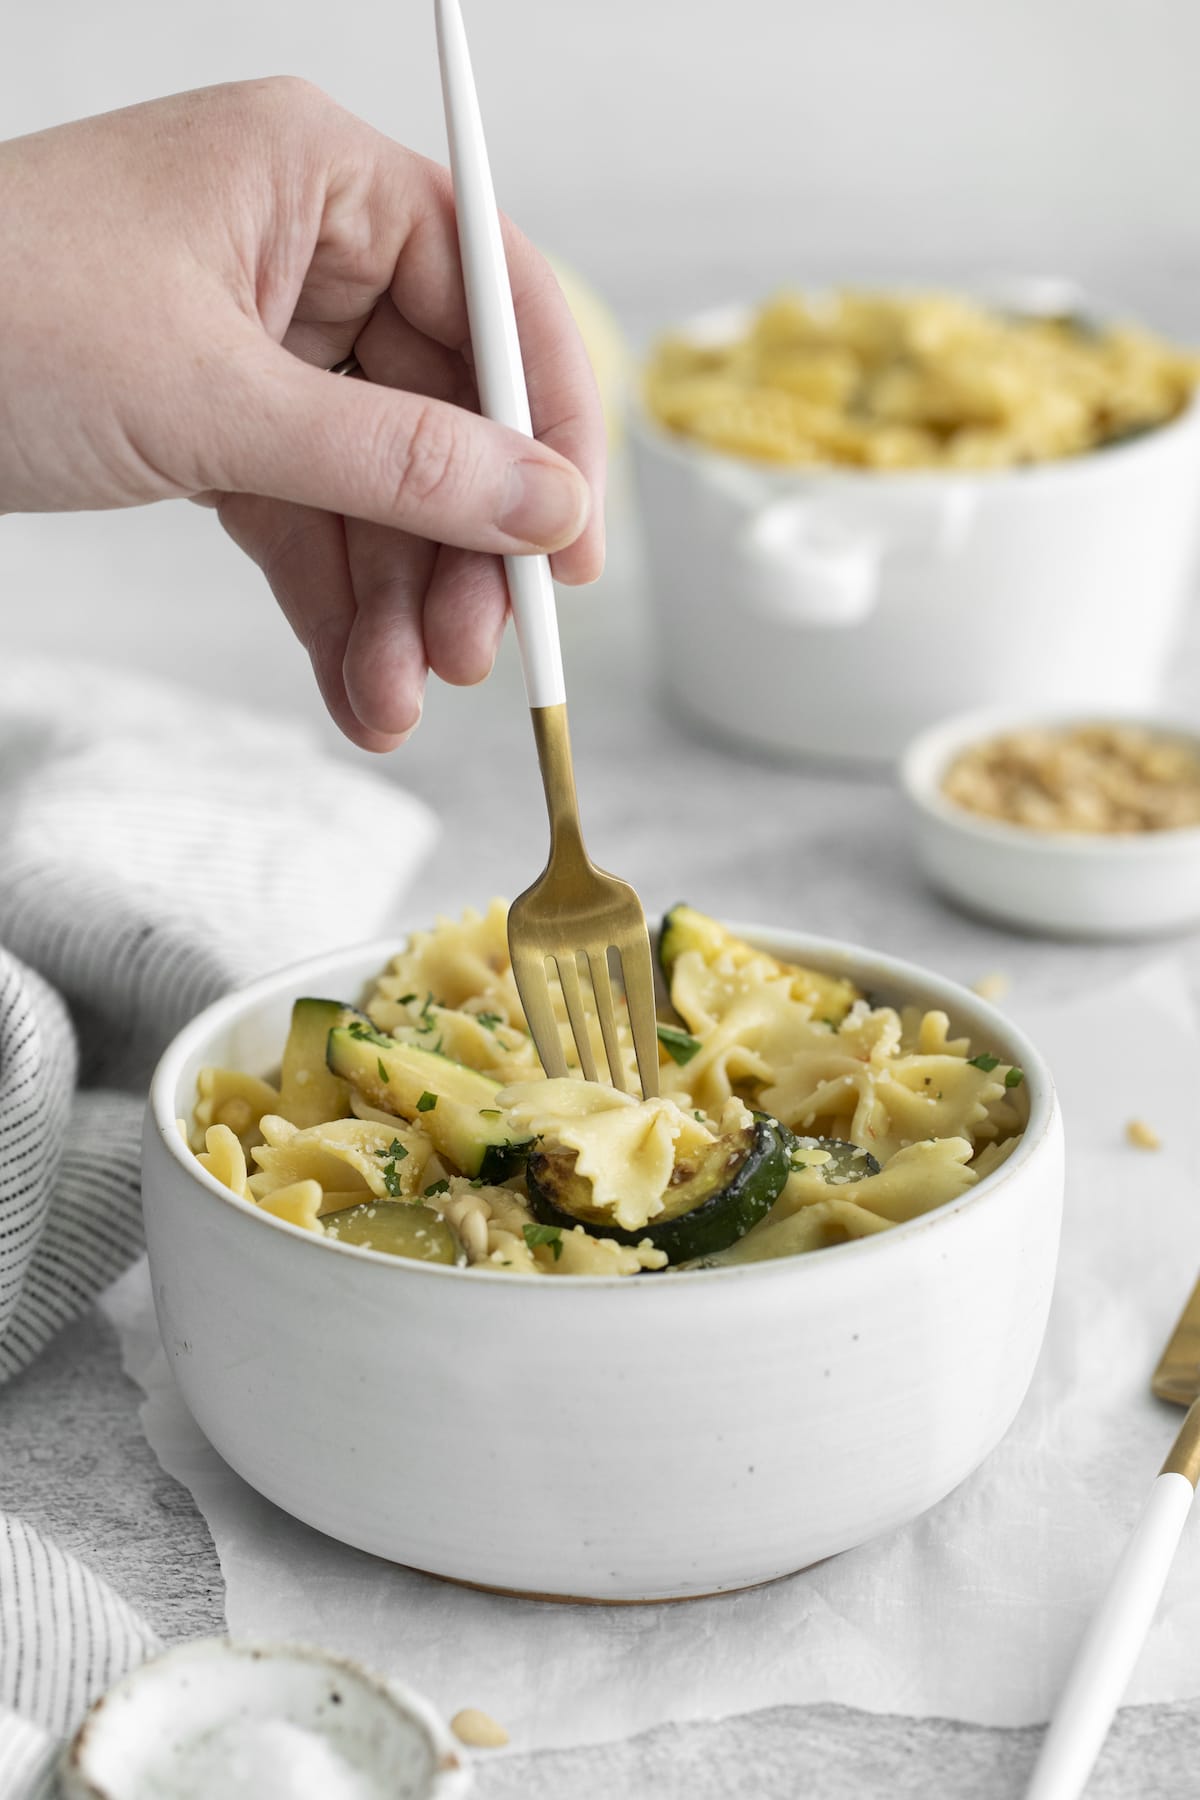 a hand holding a fork scooping up pasta with zucchini and herbs in a white bowl 